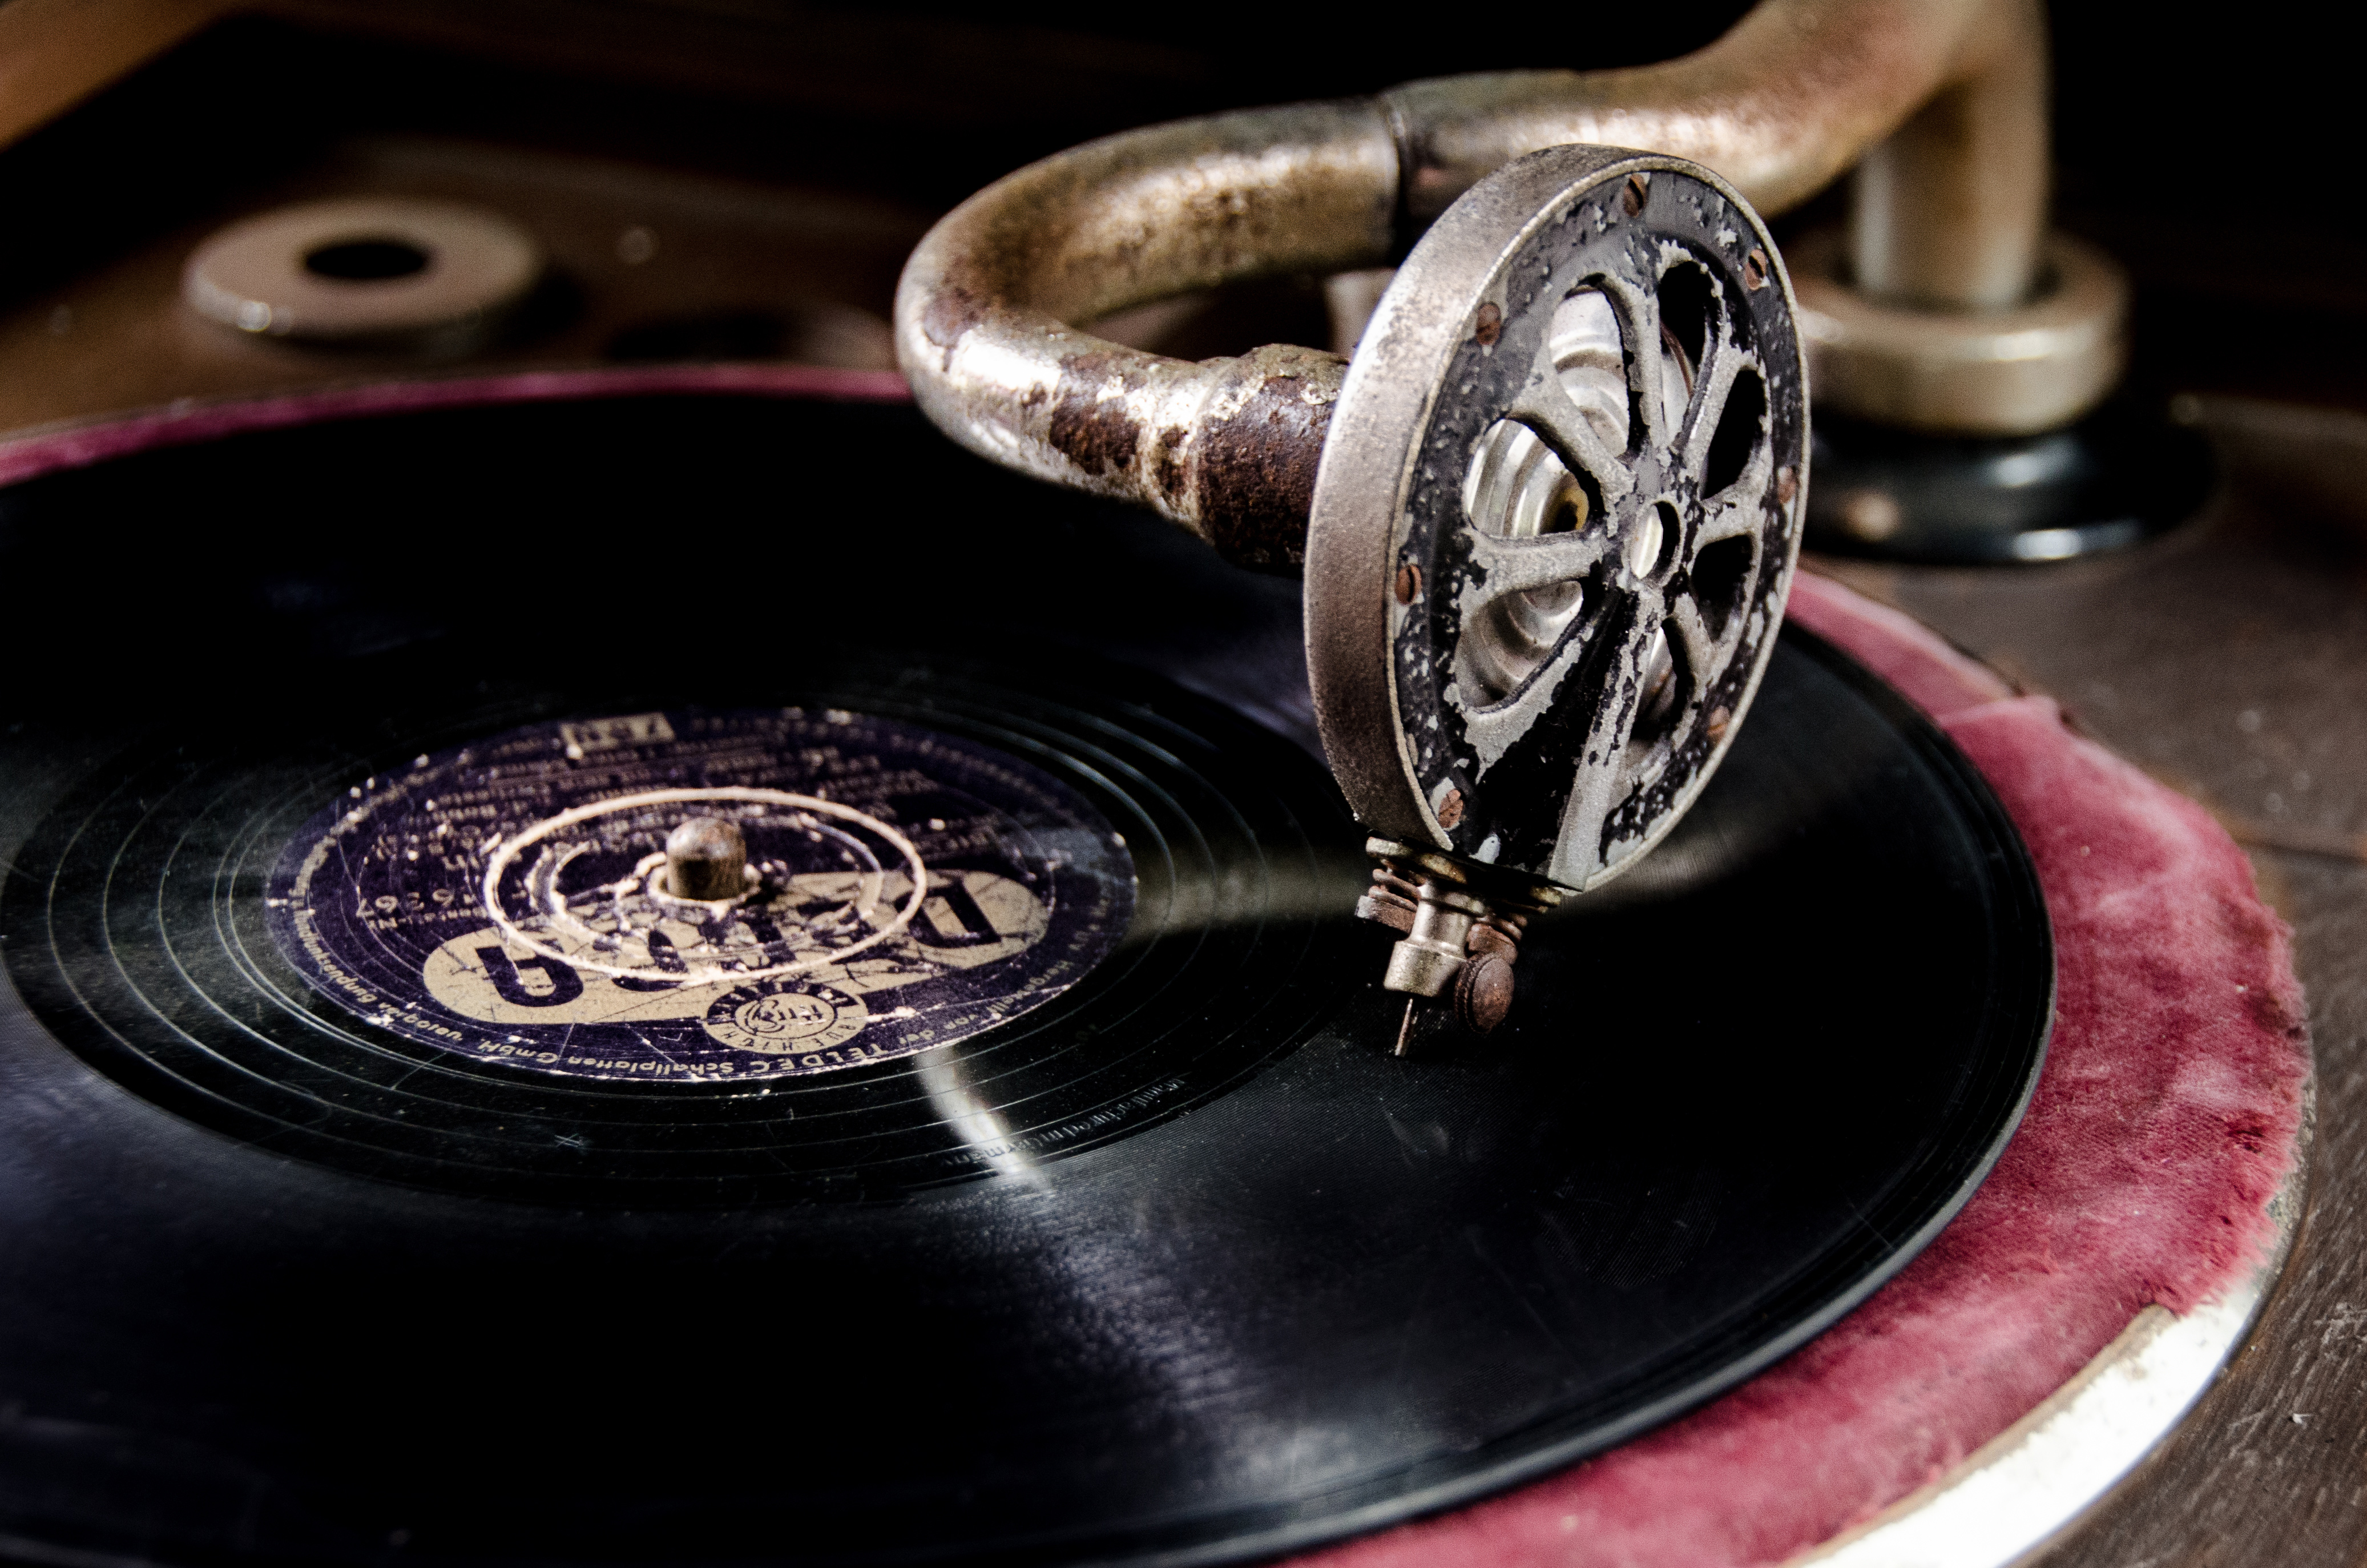 vinyl record being played